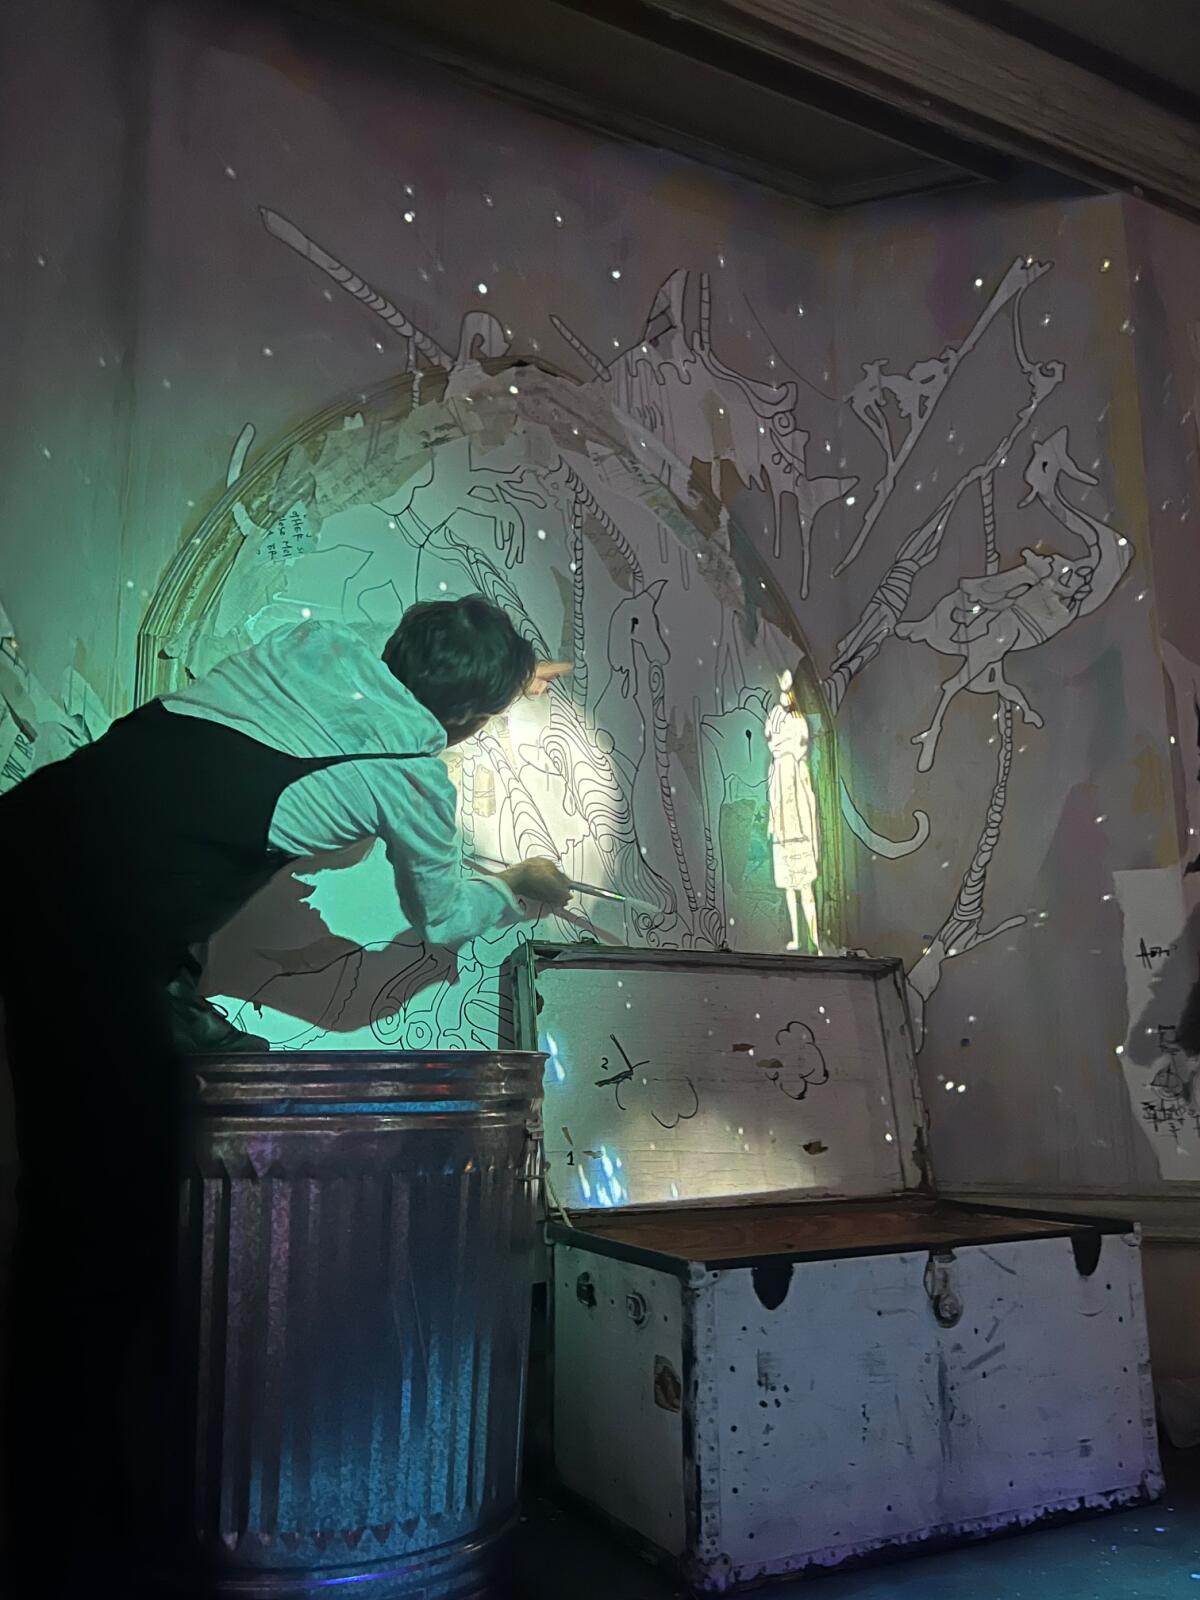 An actor appears drawing on a wall with a wand, where an animated figure appears. 